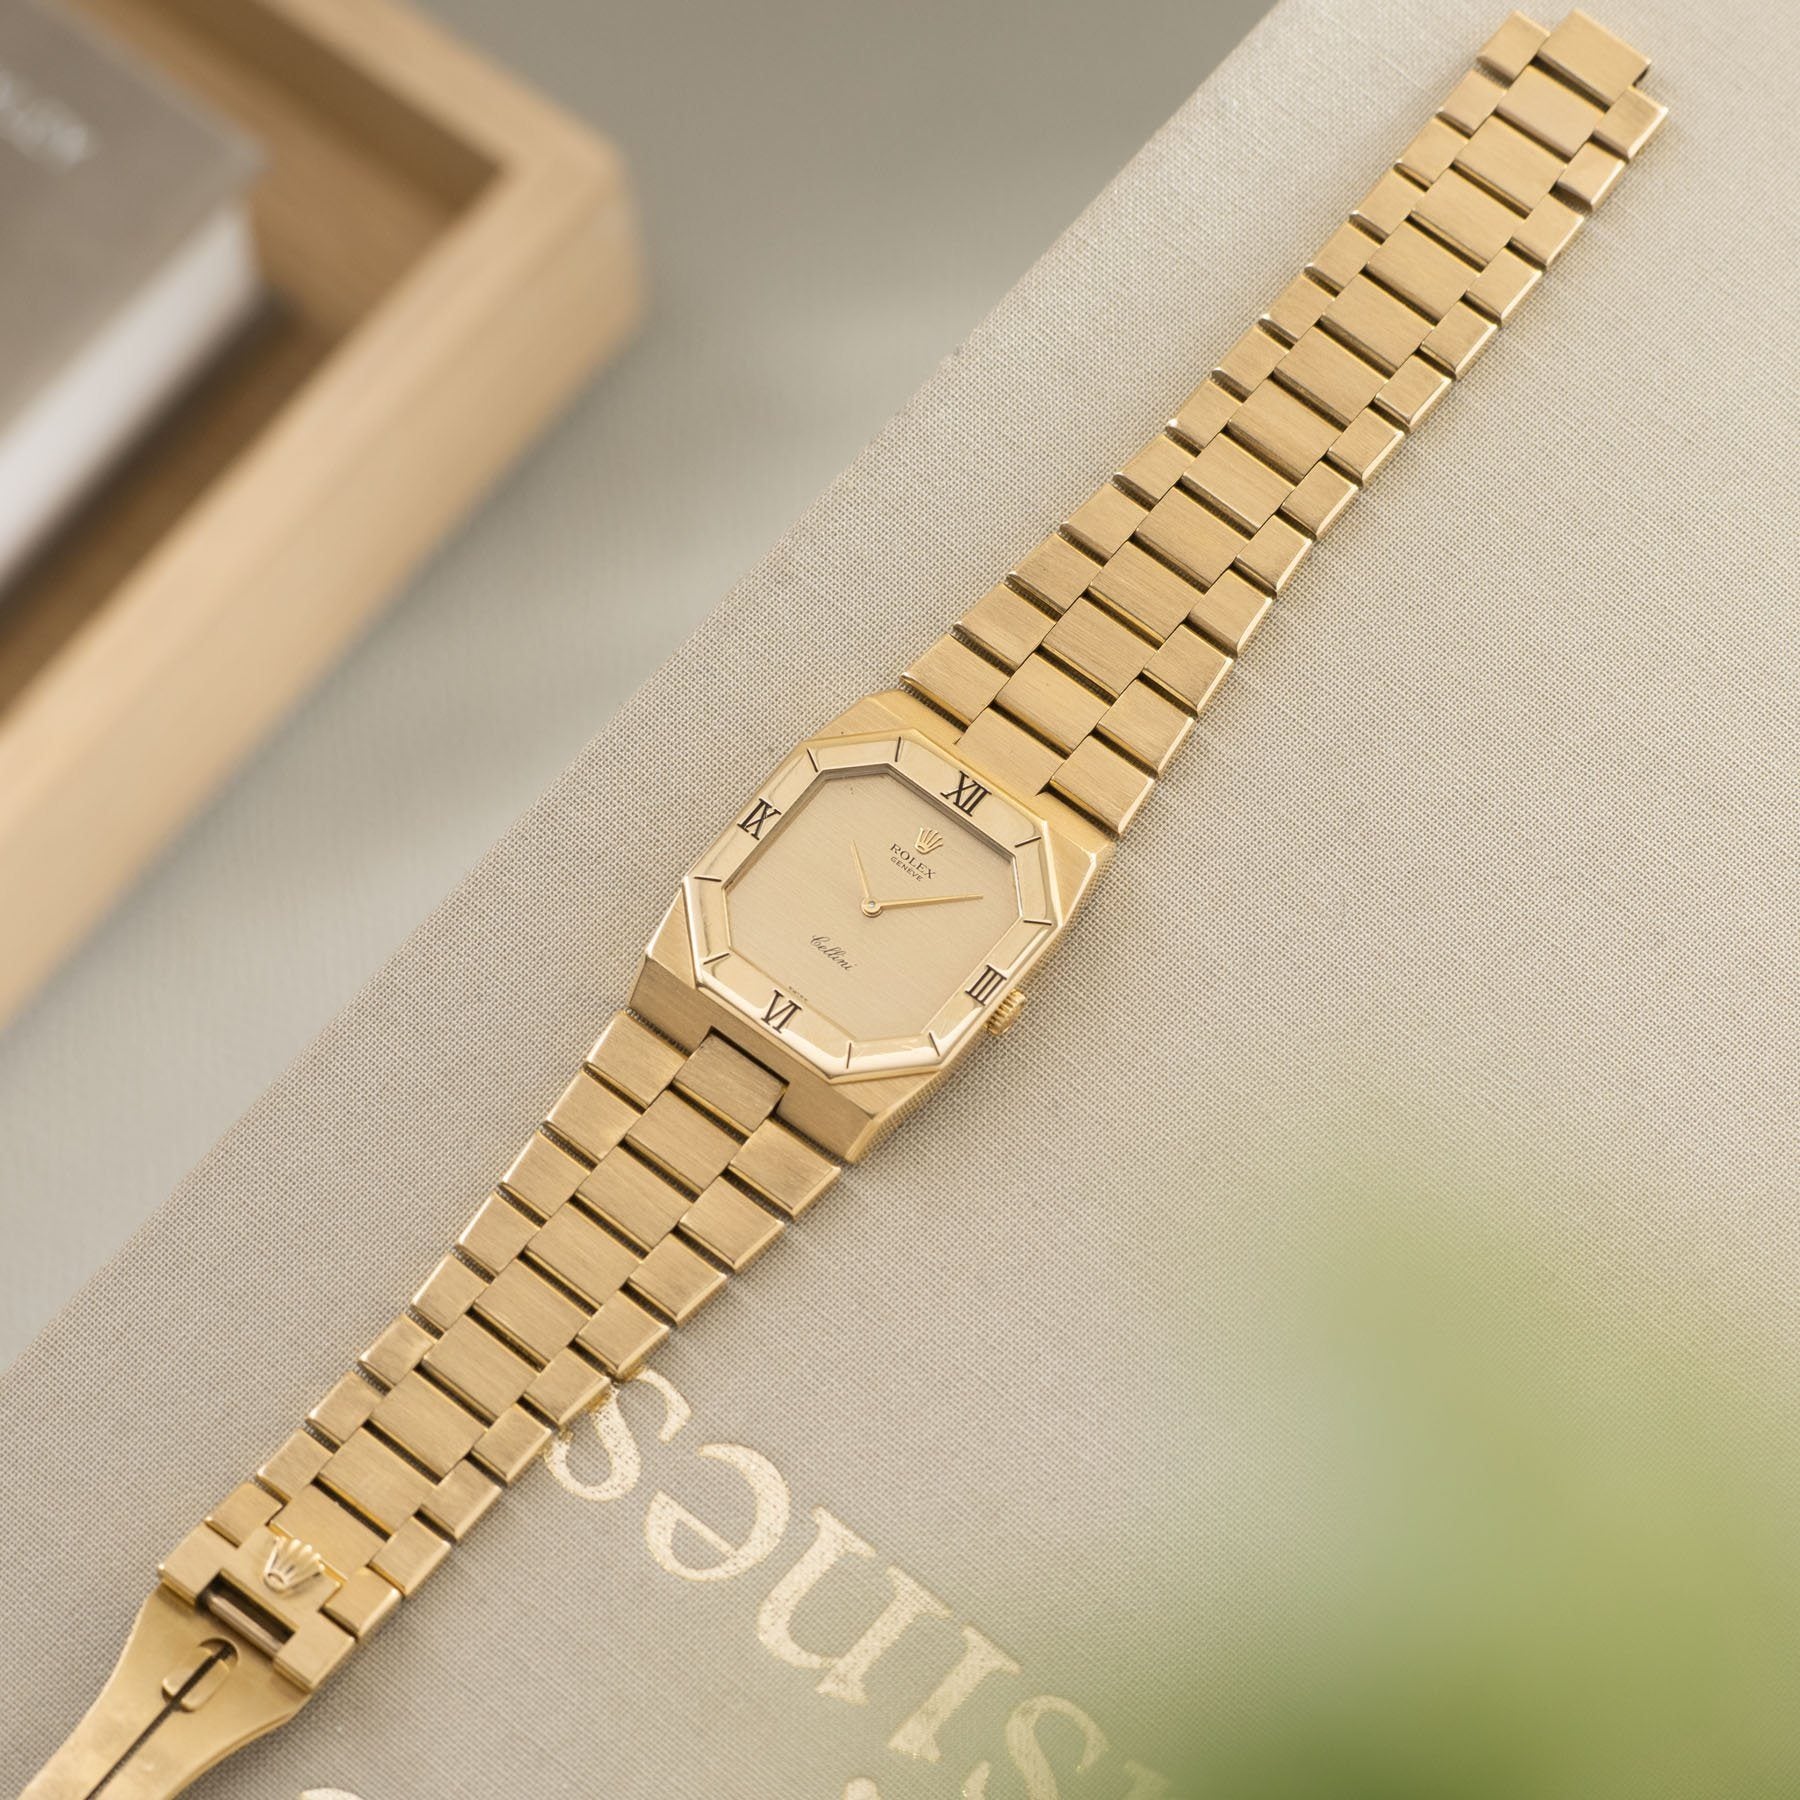 Rolex Cellini Yellow Gold Integrated Bracelet Ref 4350